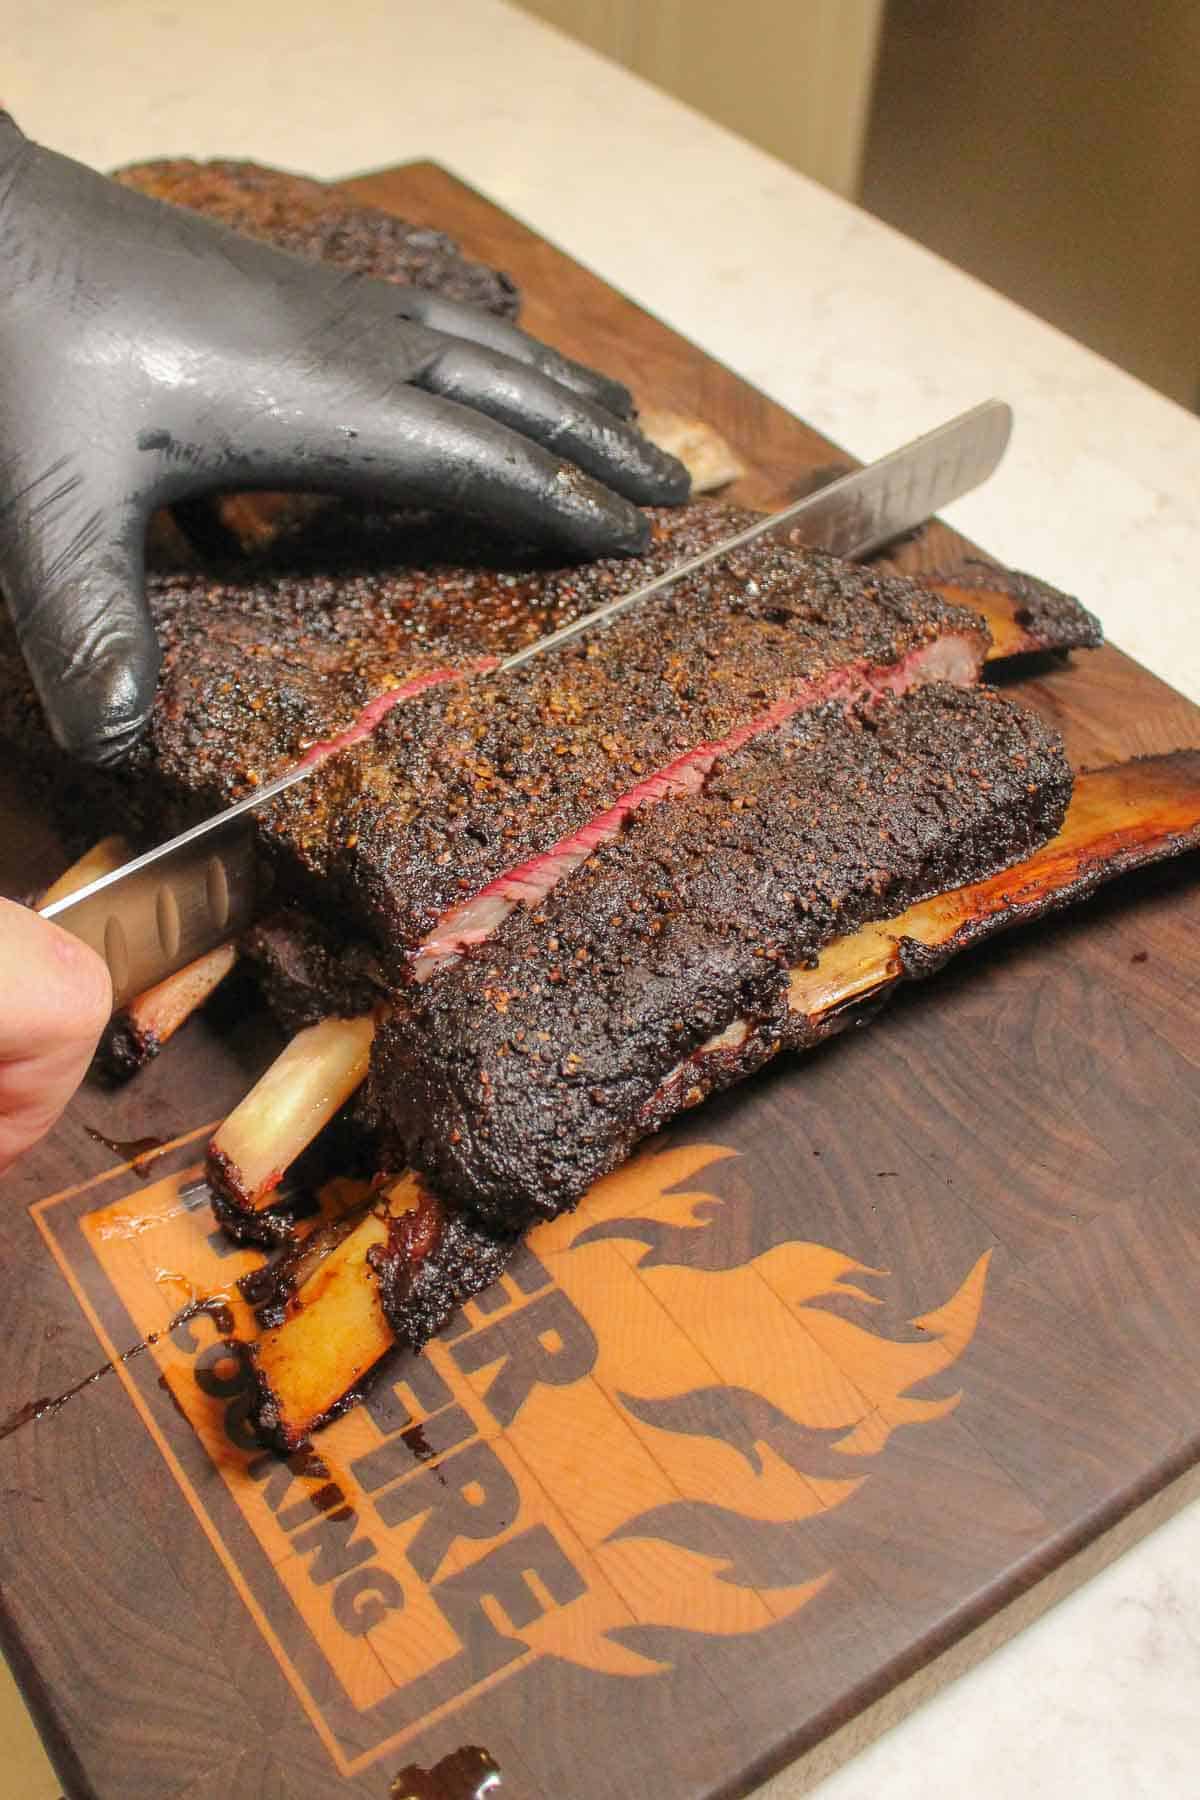 Slicing into the rack of ribs.